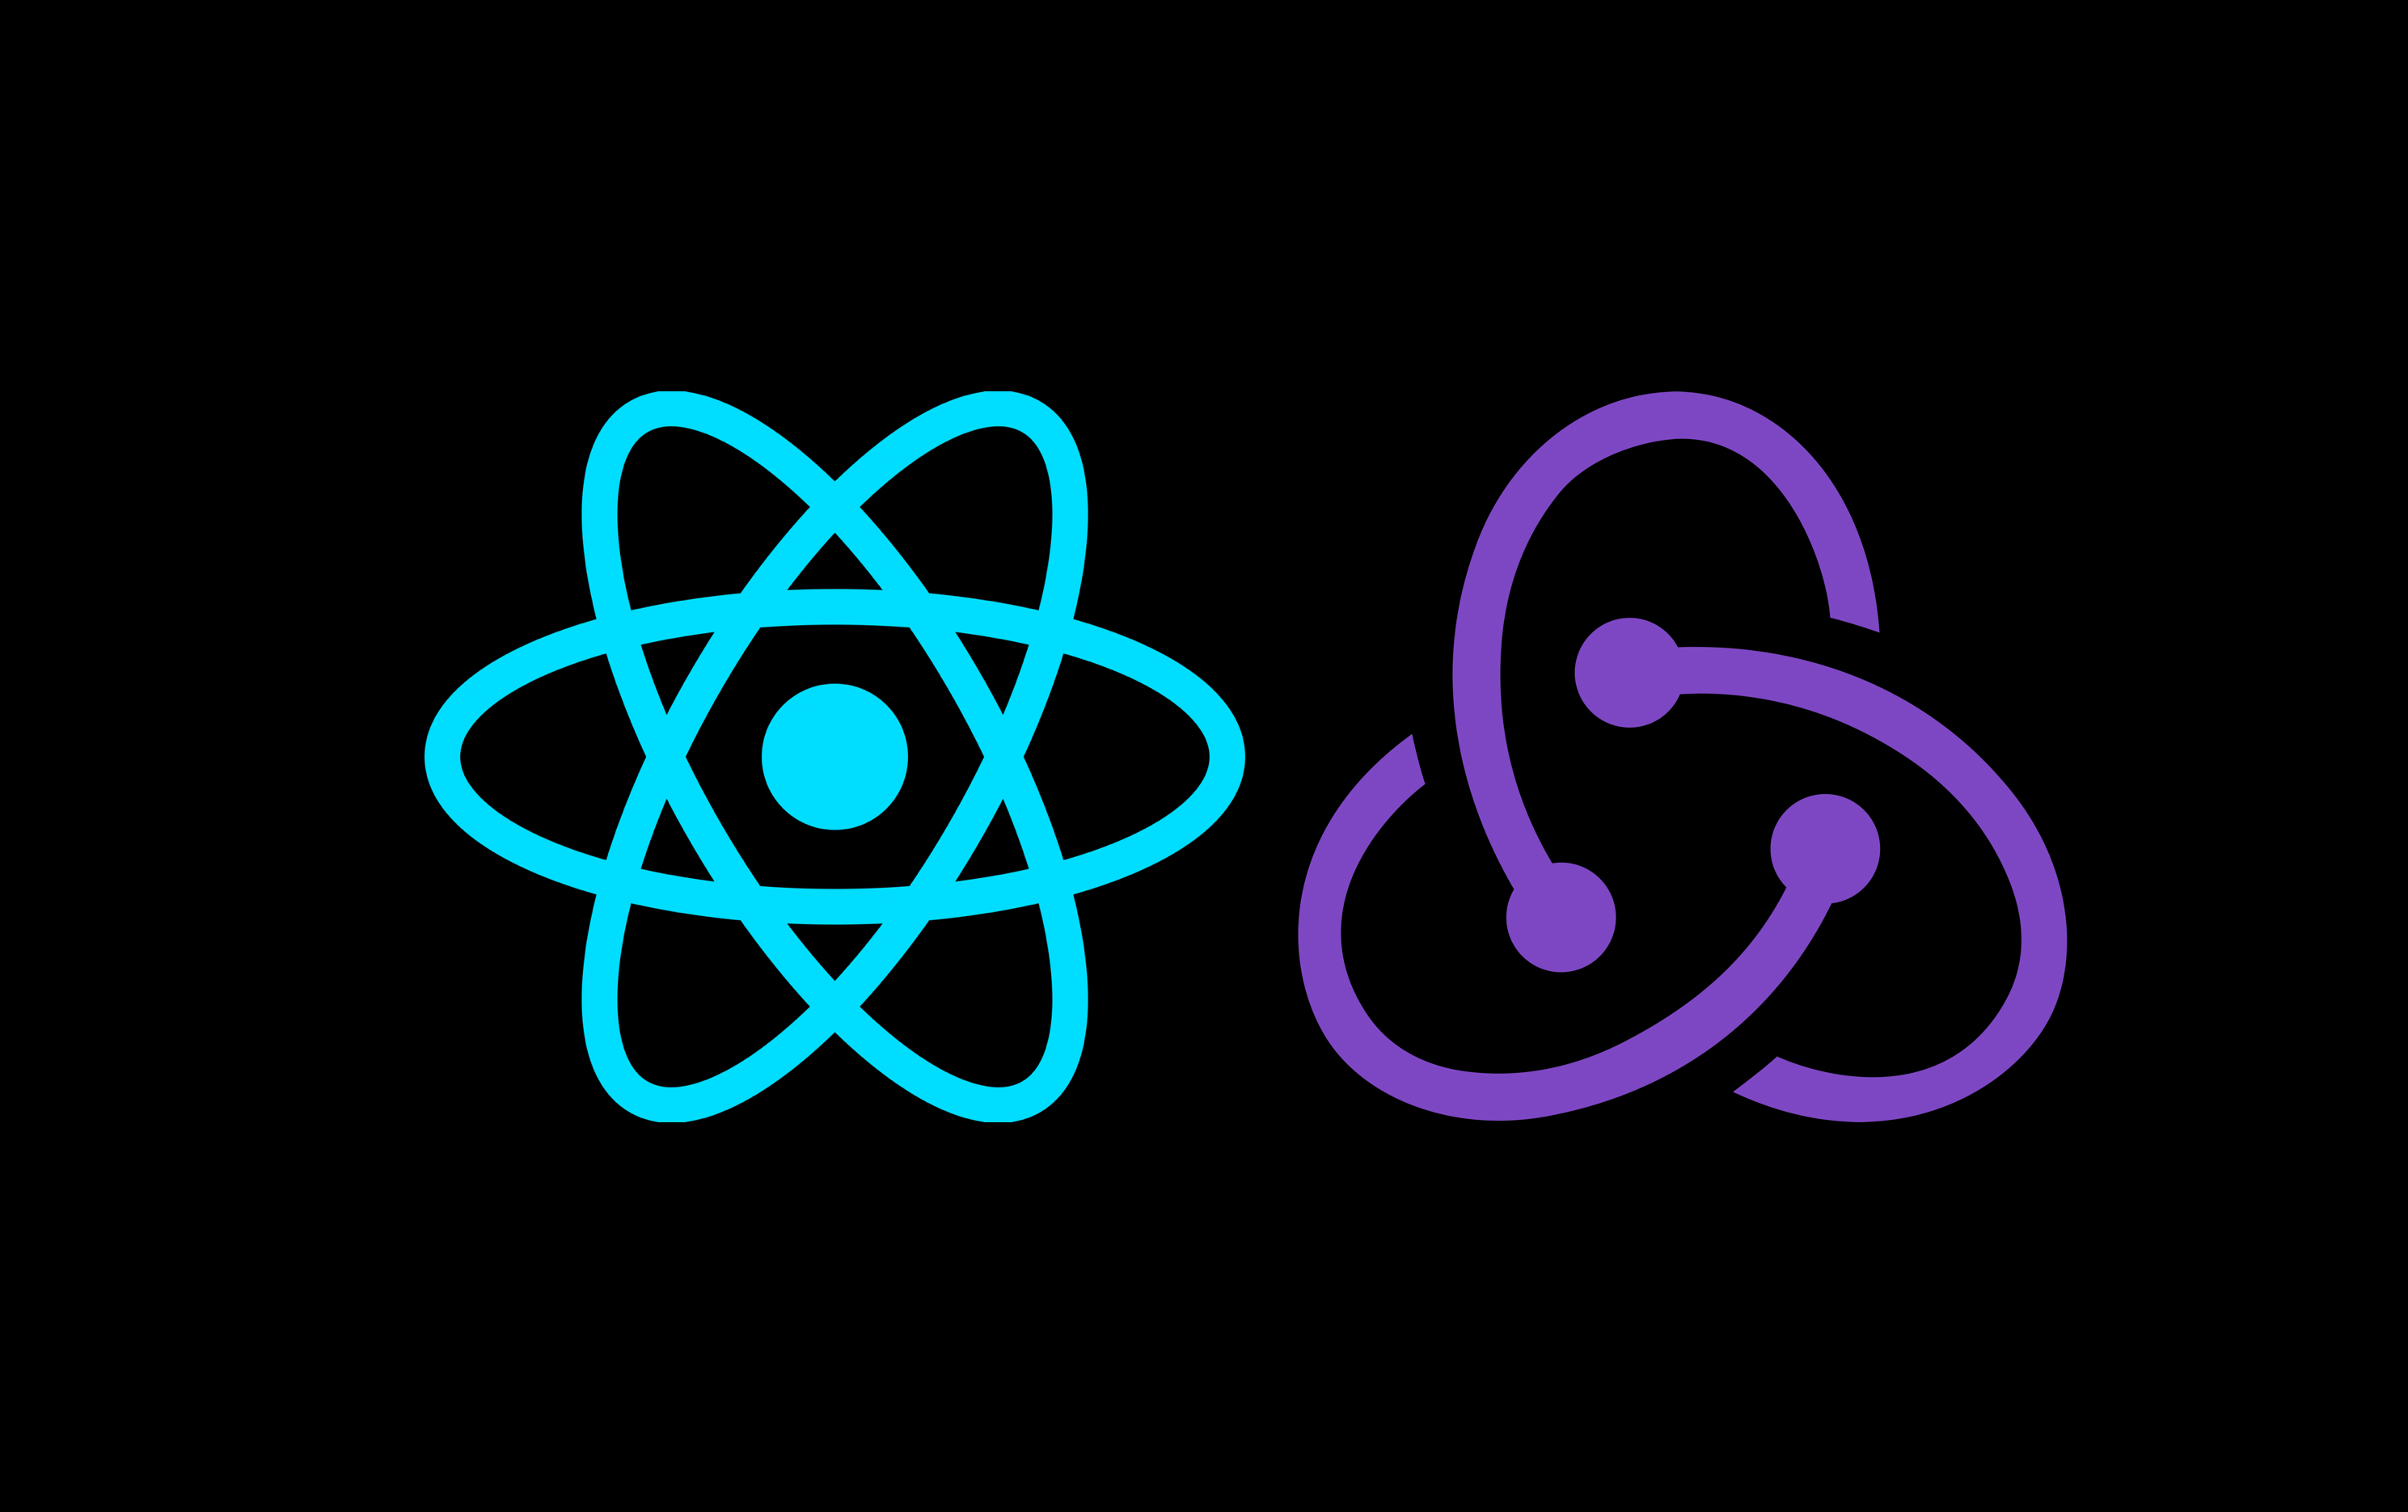 React Redux Notes by Lydia Hallie